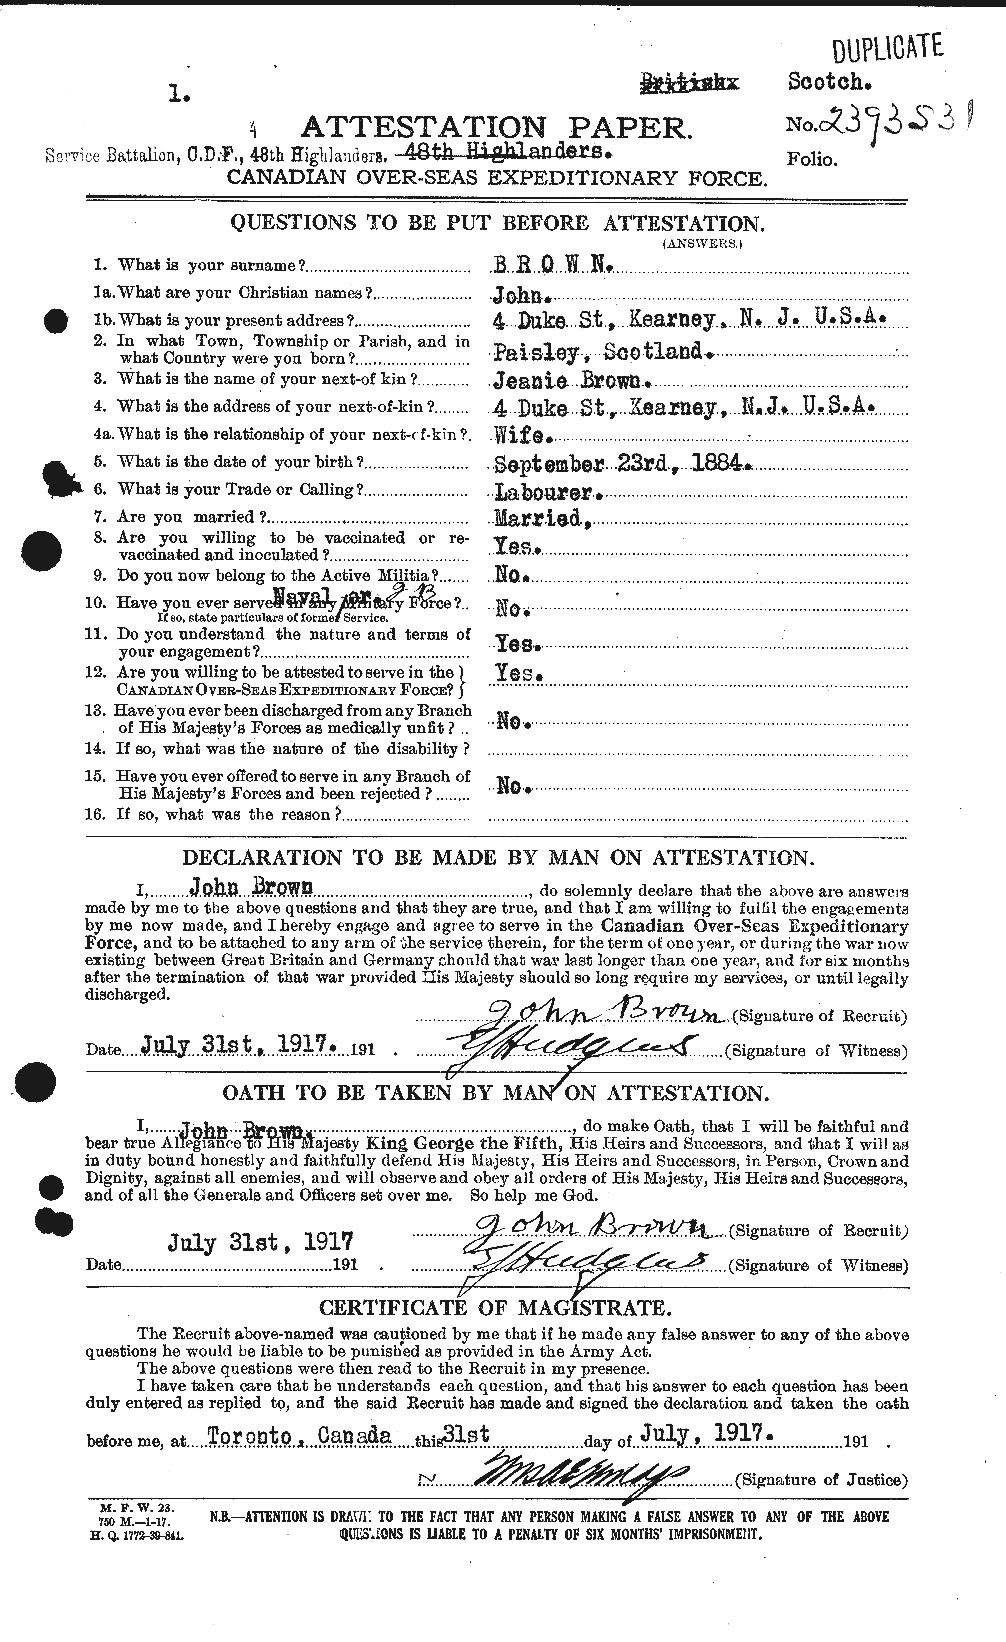 Personnel Records of the First World War - CEF 263891a